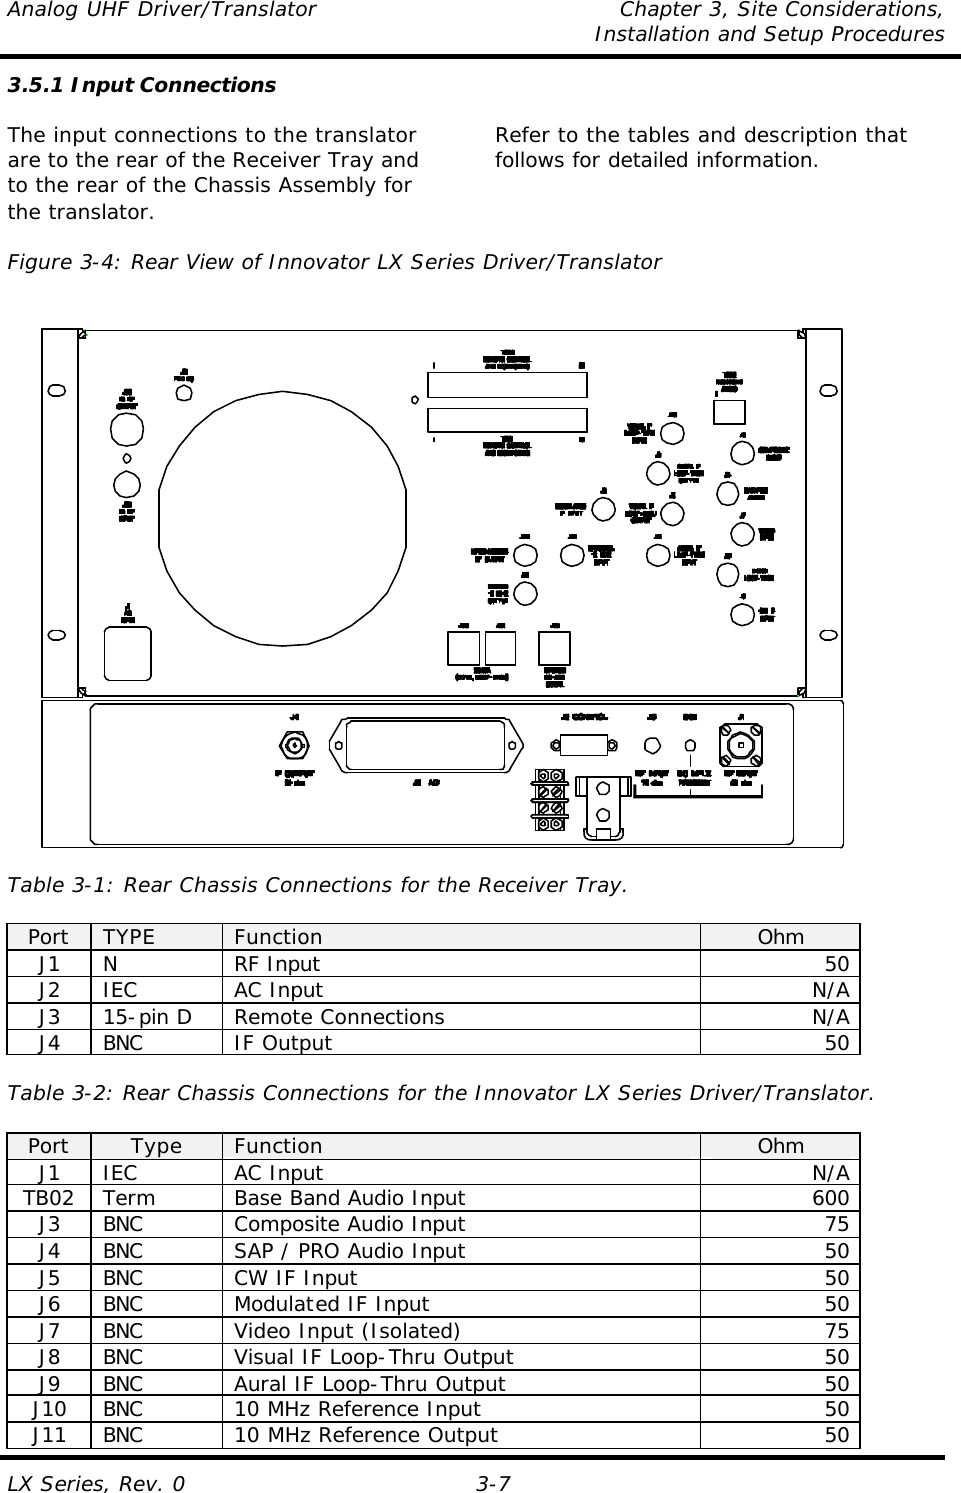 Analog UHF Driver/Translator Chapter 3, Site Considerations,   Installation and Setup Procedures  LX Series, Rev. 0 3-7 3.5.1 Input Connections  The input connections to the translator are to the rear of the Receiver Tray and to the rear of the Chassis Assembly for the translator.   Refer to the tables and description that follows for detailed information.   Figure 3-4: Rear View of Innovator LX Series Driver/Translator                         Table 3-1: Rear Chassis Connections for the Receiver Tray.  Port TYPE Function Ohm J1 N RF Input 50 J2 IEC AC Input N/A J3 15-pin D Remote Connections N/A J4 BNC IF Output 50  Table 3-2: Rear Chassis Connections for the Innovator LX Series Driver/Translator.  Port Type Function Ohm J1 IEC AC Input N/A TB02 Term Base Band Audio Input 600  J3 BNC Composite Audio Input 75 J4 BNC SAP / PRO Audio Input 50 J5 BNC CW IF Input 50 J6 BNC Modulated IF Input 50 J7 BNC Video Input (Isolated) 75 J8 BNC Visual IF Loop-Thru Output 50 J9 BNC Aural IF Loop-Thru Output 50 J10 BNC 10 MHz Reference Input 50 J11 BNC 10 MHz Reference Output 50 